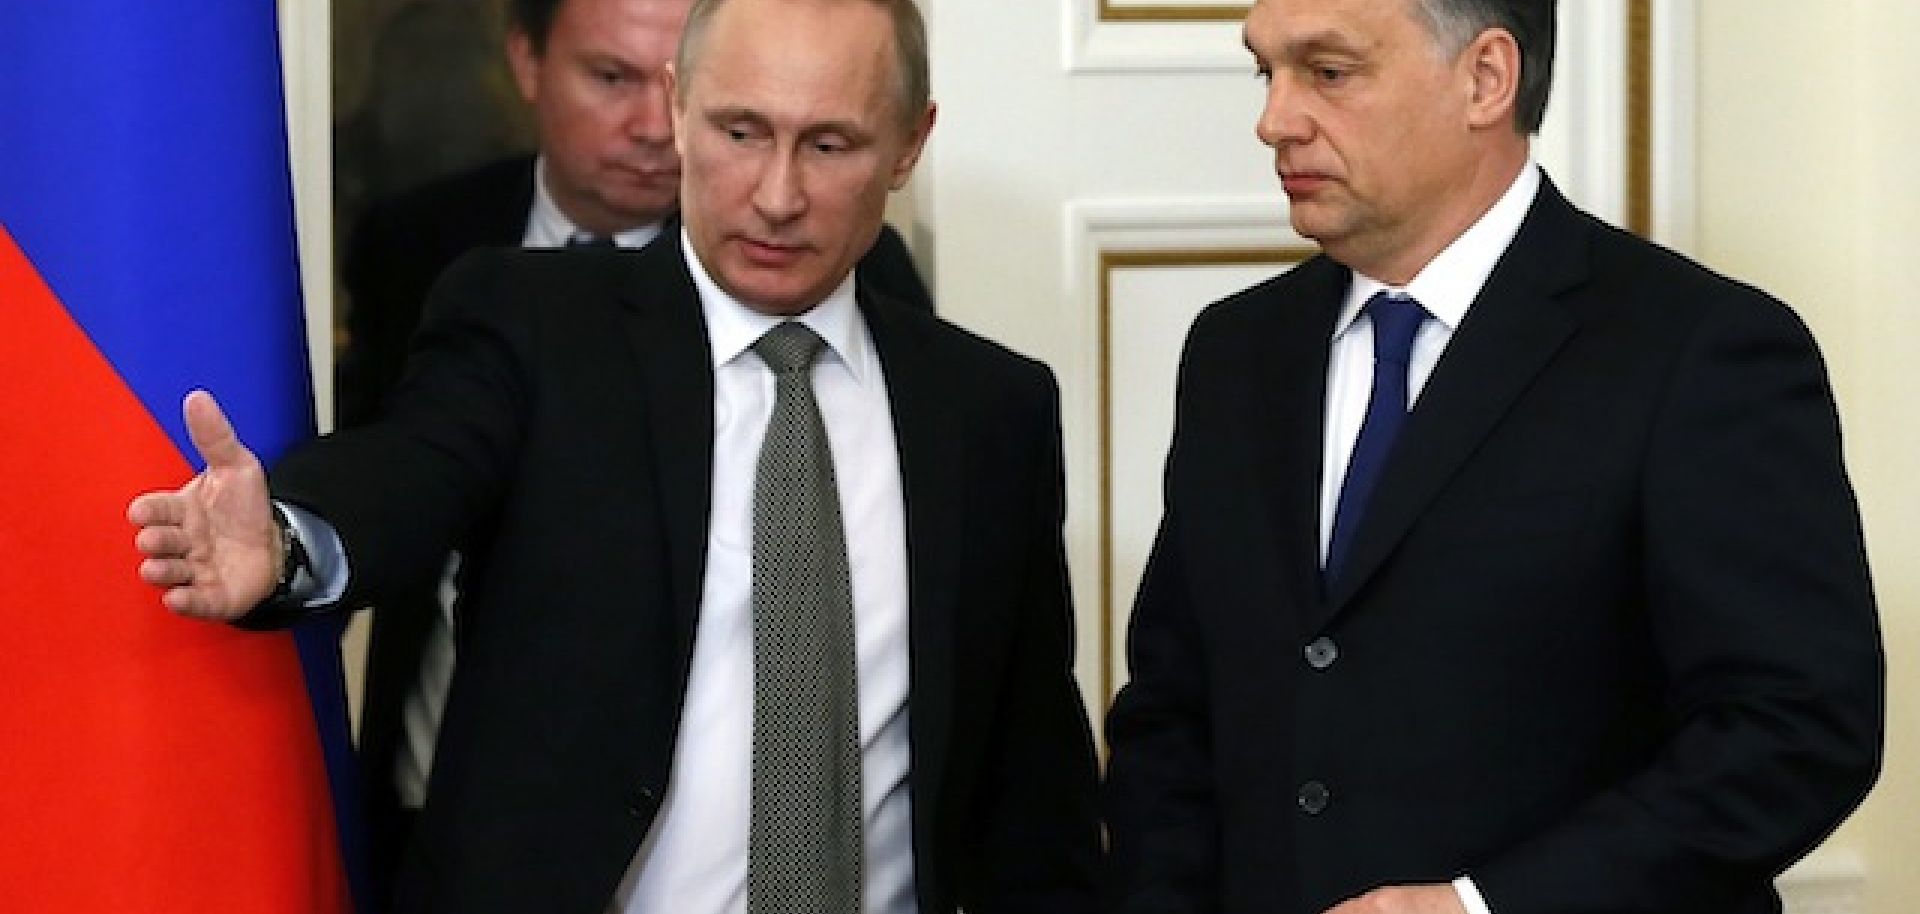 Russia's President Vladimir Putin (L) and Hungary's Prime Minister Viktor Orban (R) speak during a meeting at Putin's residence outside Moscow, on January 14, 2014.